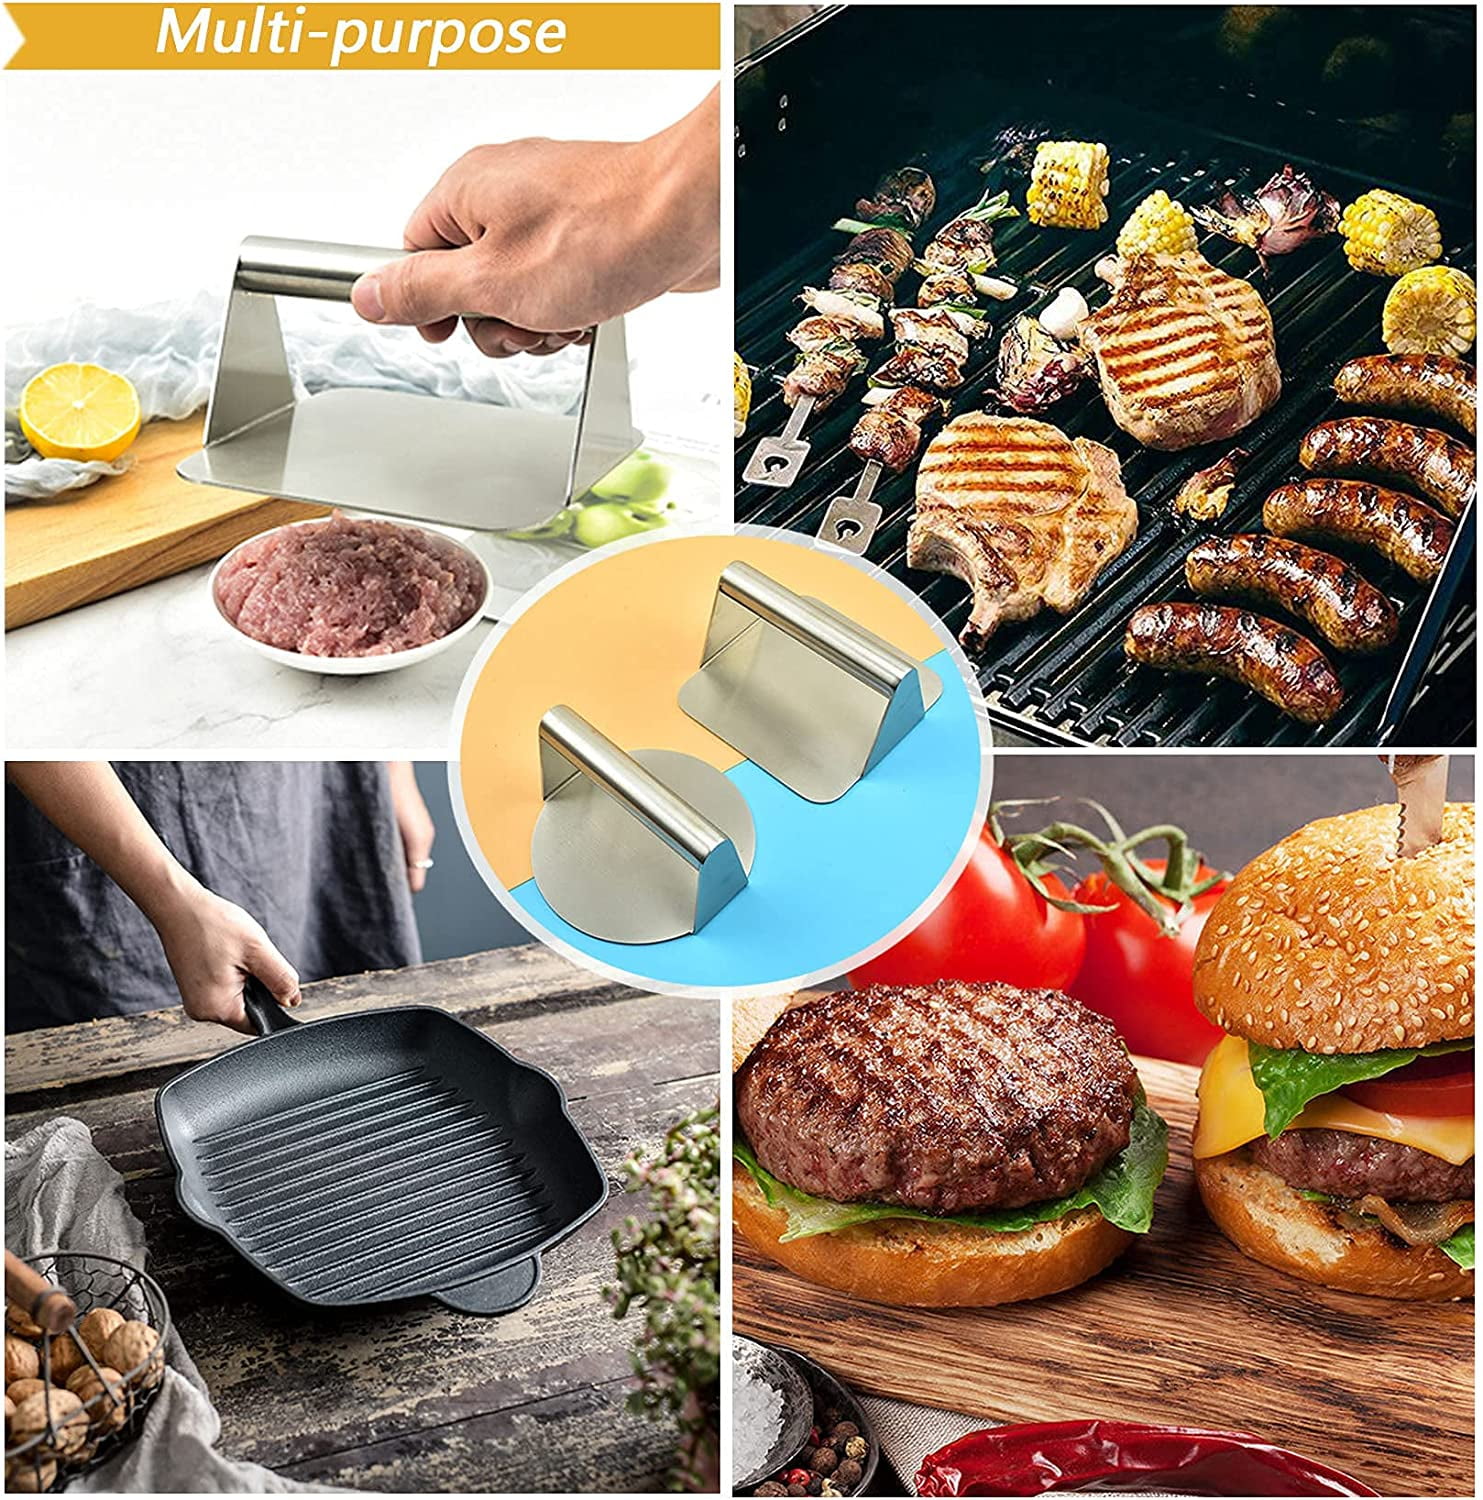 Ofspeizc Smash Burger Press for Griddle, Hamburger Press Patty Maker, Stainless Steel Meat Flattener Tool, Burger Smasher for Cooking, Other